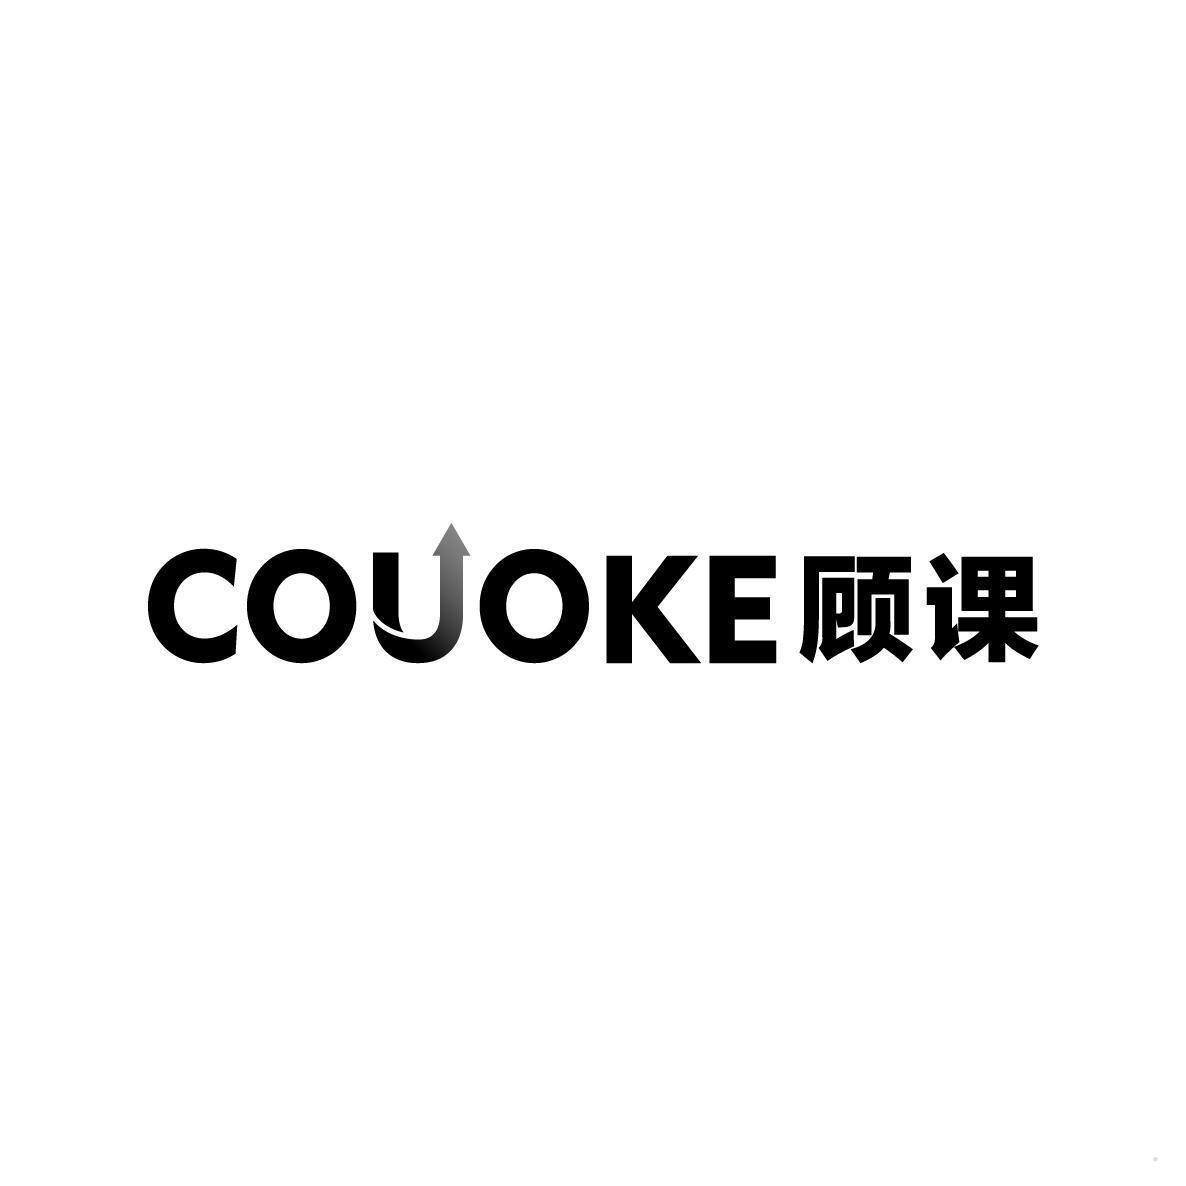 COUOKE 顾课